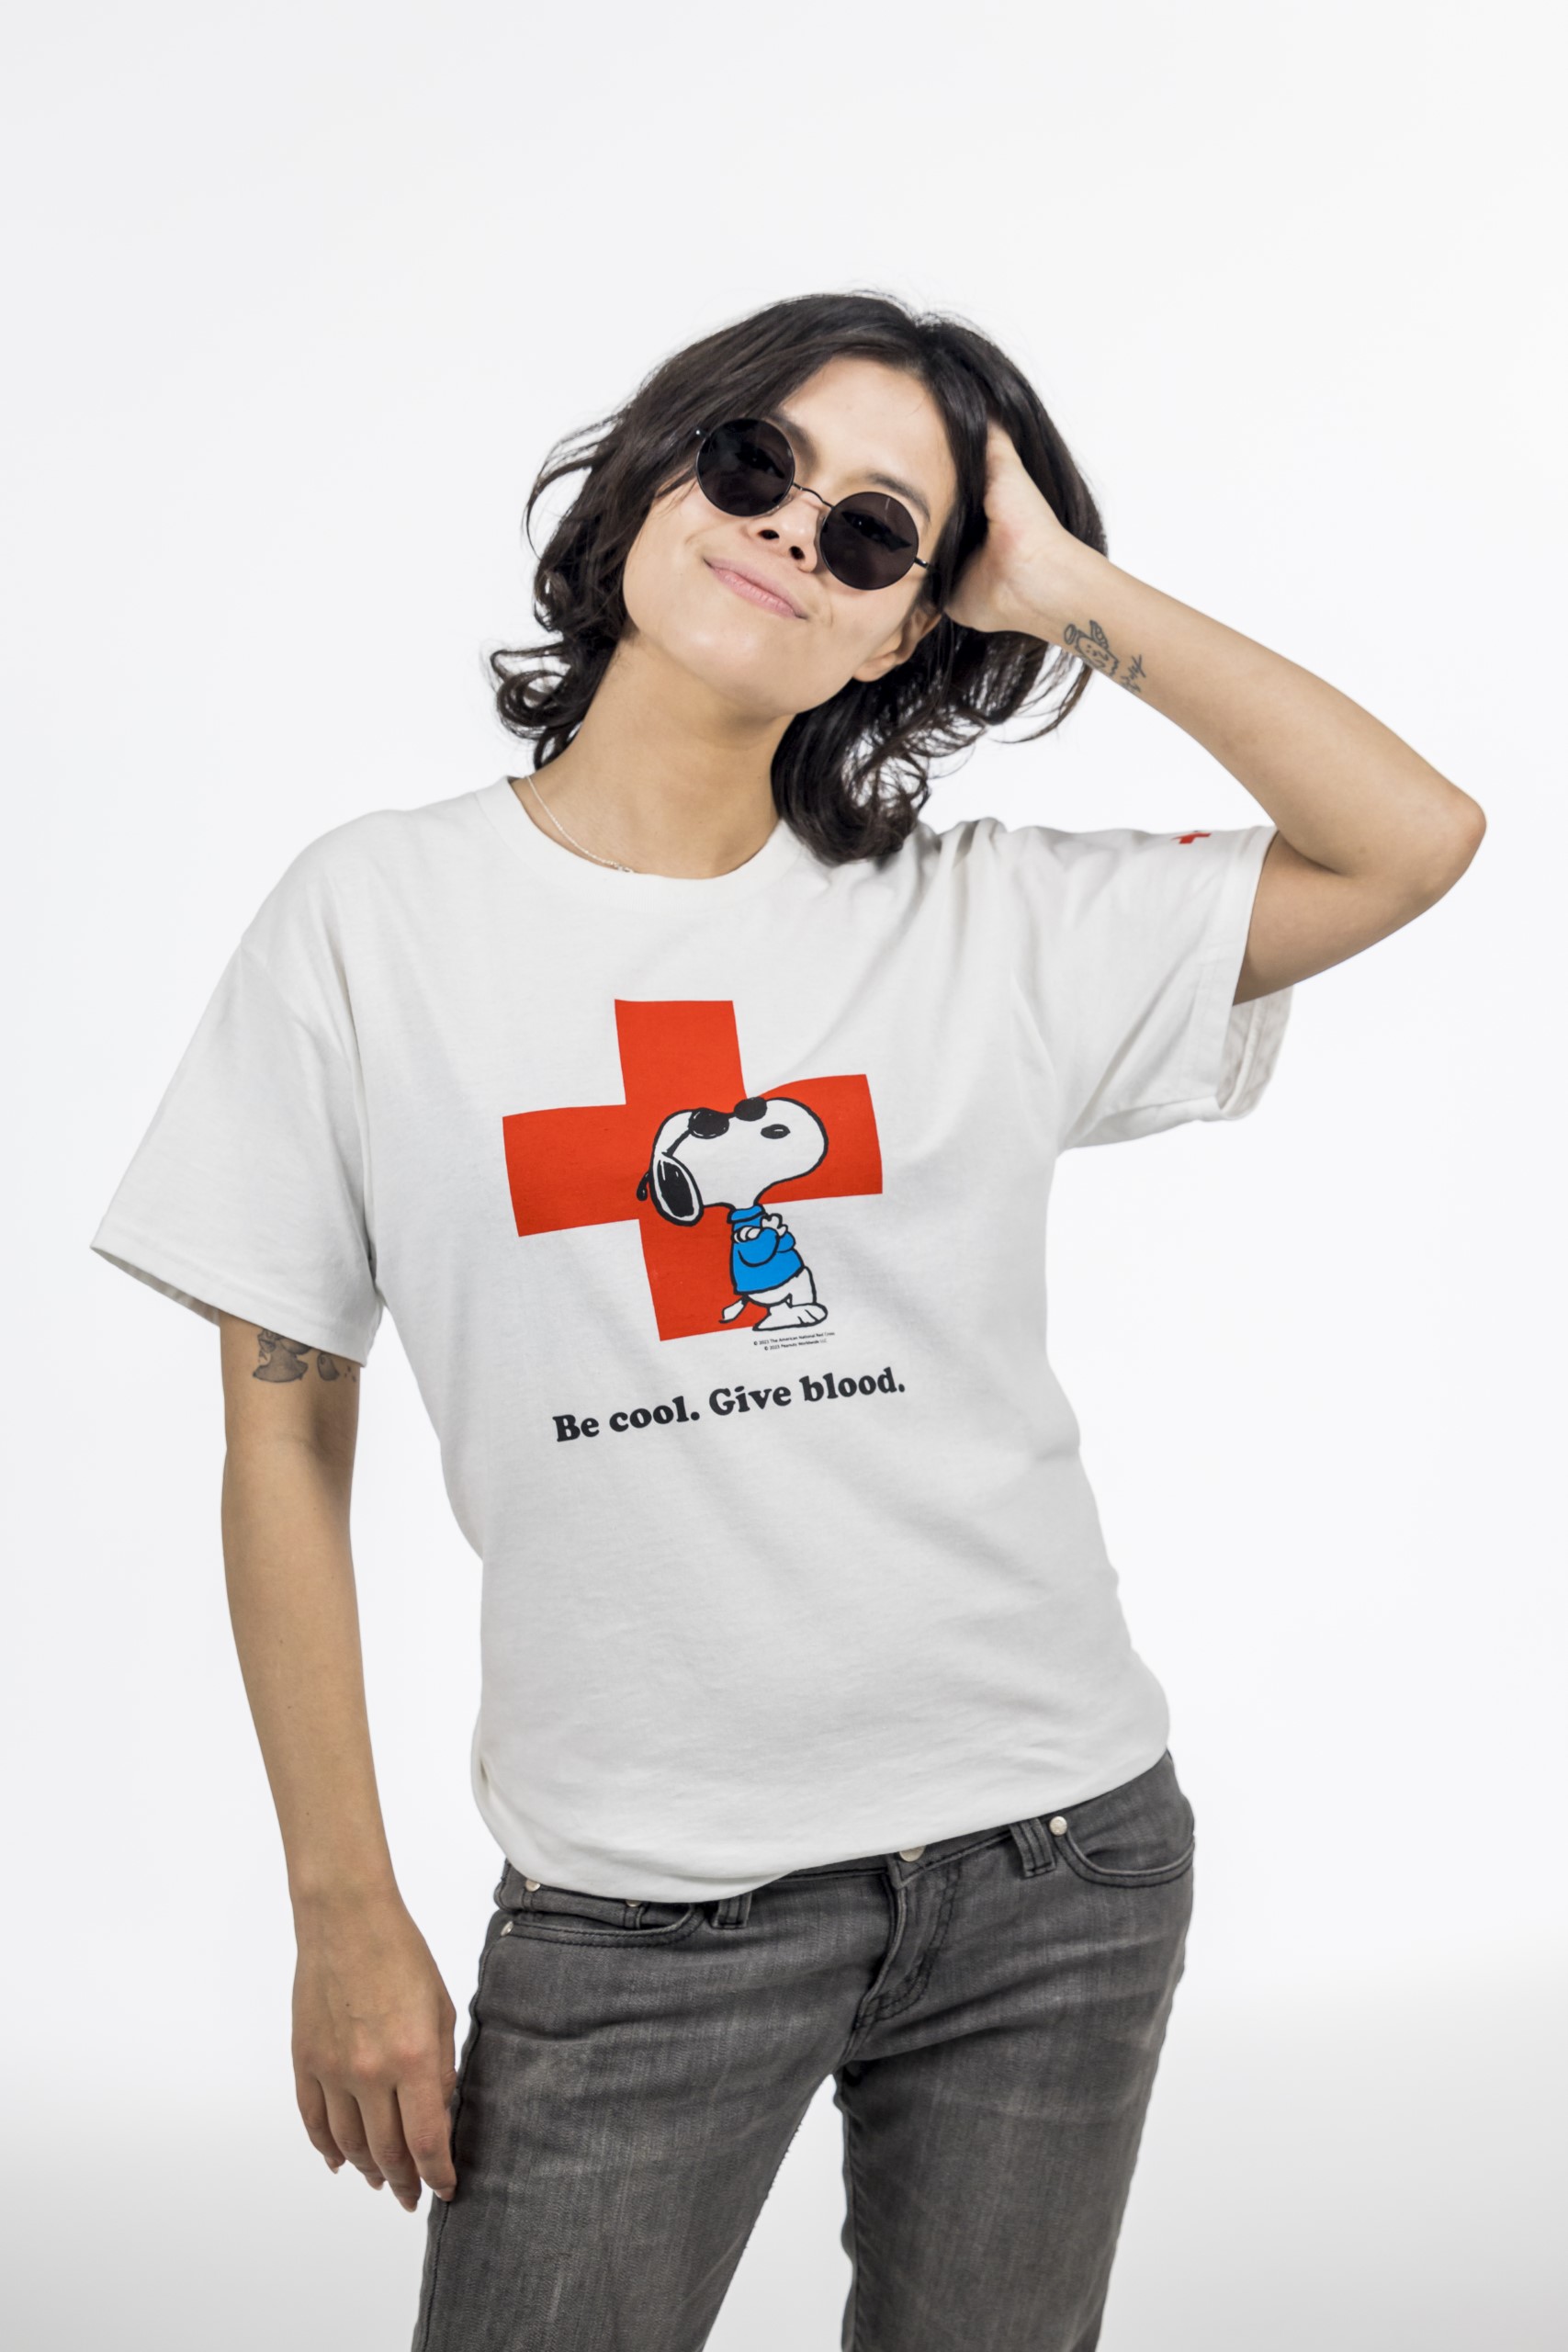 A photo of a person wearing a white t-shirt with Snoopy on it. It has Joe Cool/Snoopy leaning against a the logo of the Red Cross.